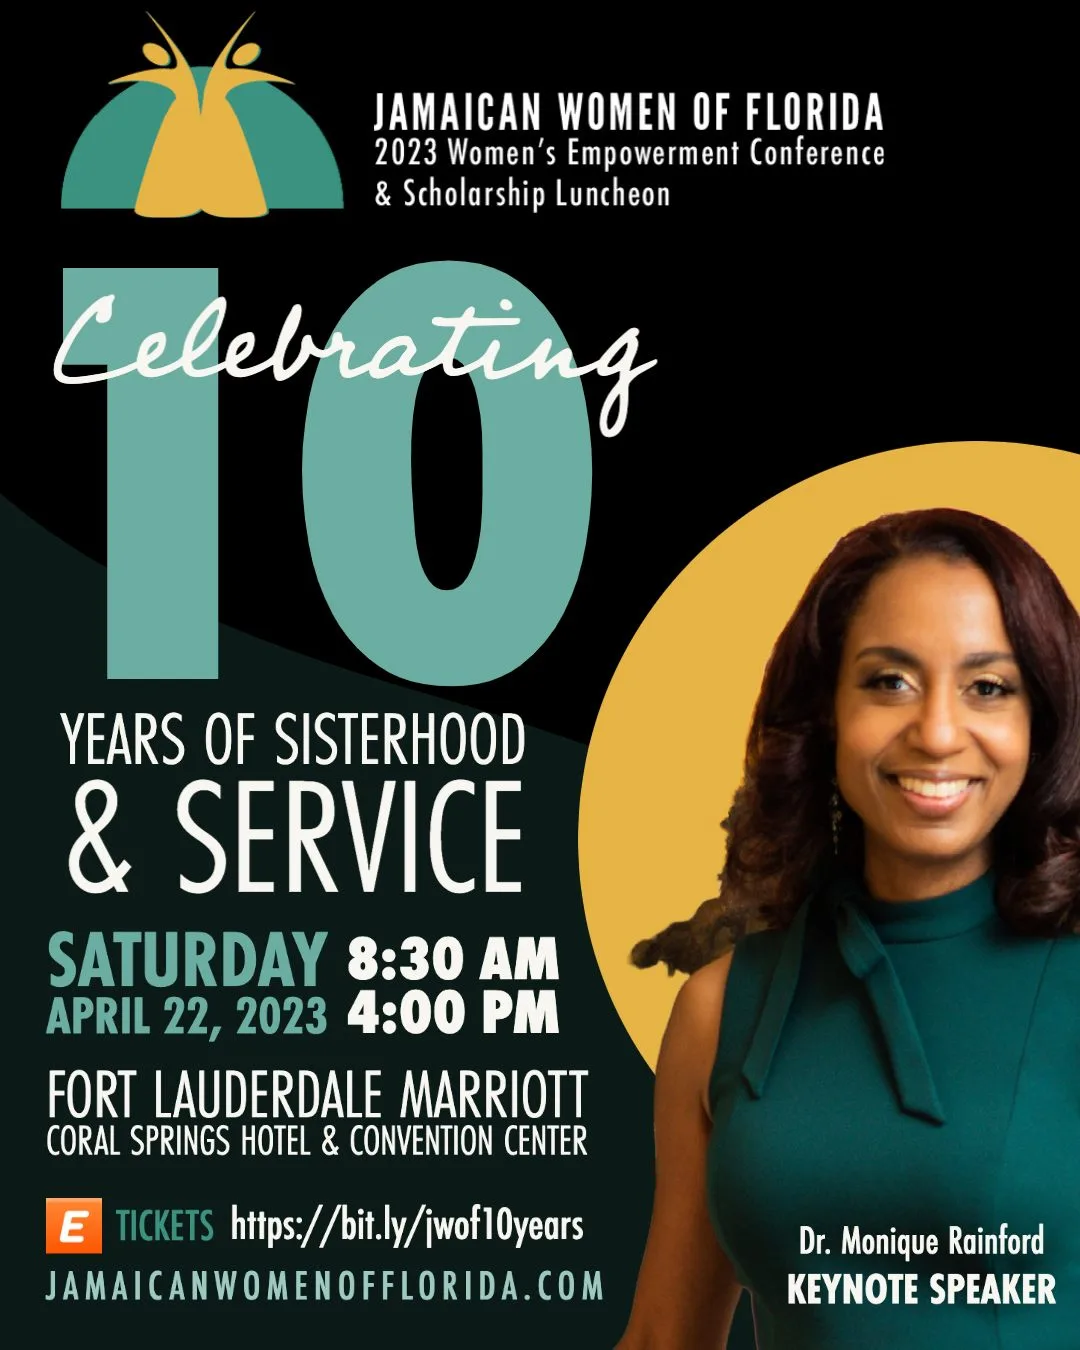 Jamaican Women of Florida Empowerment Conference & Scholarship Luncheon 2023